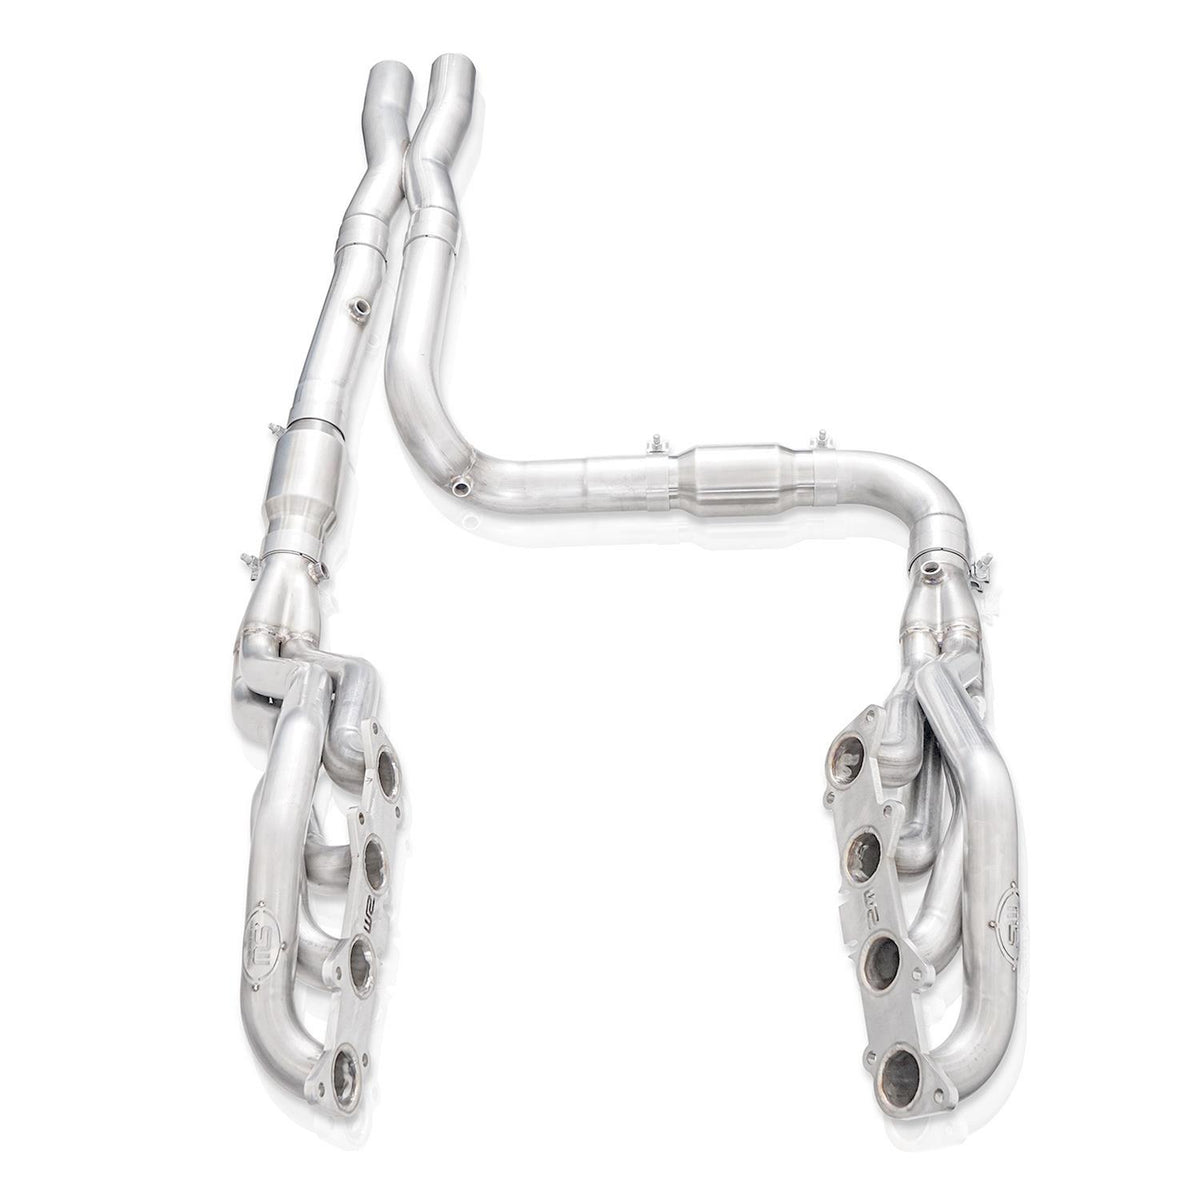 STAINLESS WORKS Catted Performance Connect Headers Ford F-150 2015-2021 - eliteracefab.com